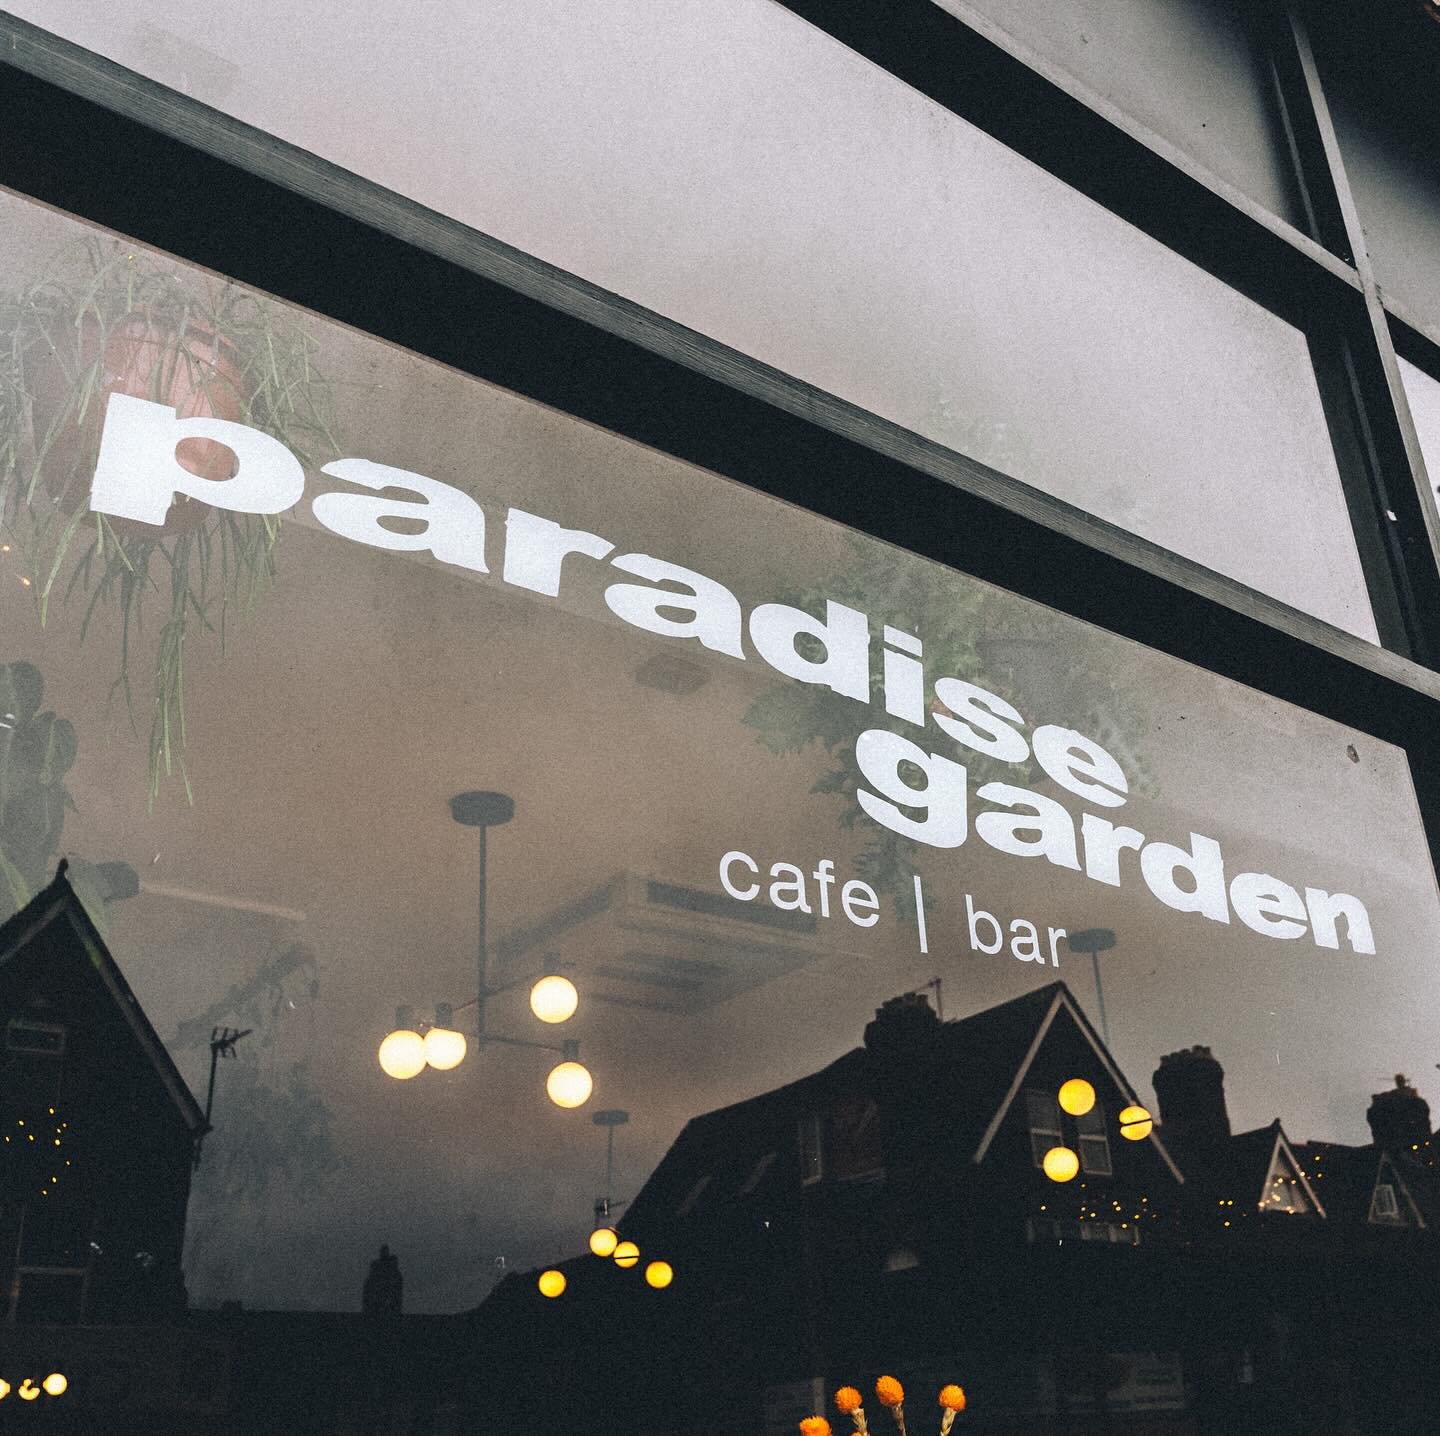 This week in Paradise Garden ☀️🌿

Weds: @shangrilaughs takeover the yurt with their monthly does of belly laughs 🎙️ + 241 cocktails in the bar🍹

Thurs: @outer__worlds, our monthly jazz improvisation and collaboration night returns with a guest per